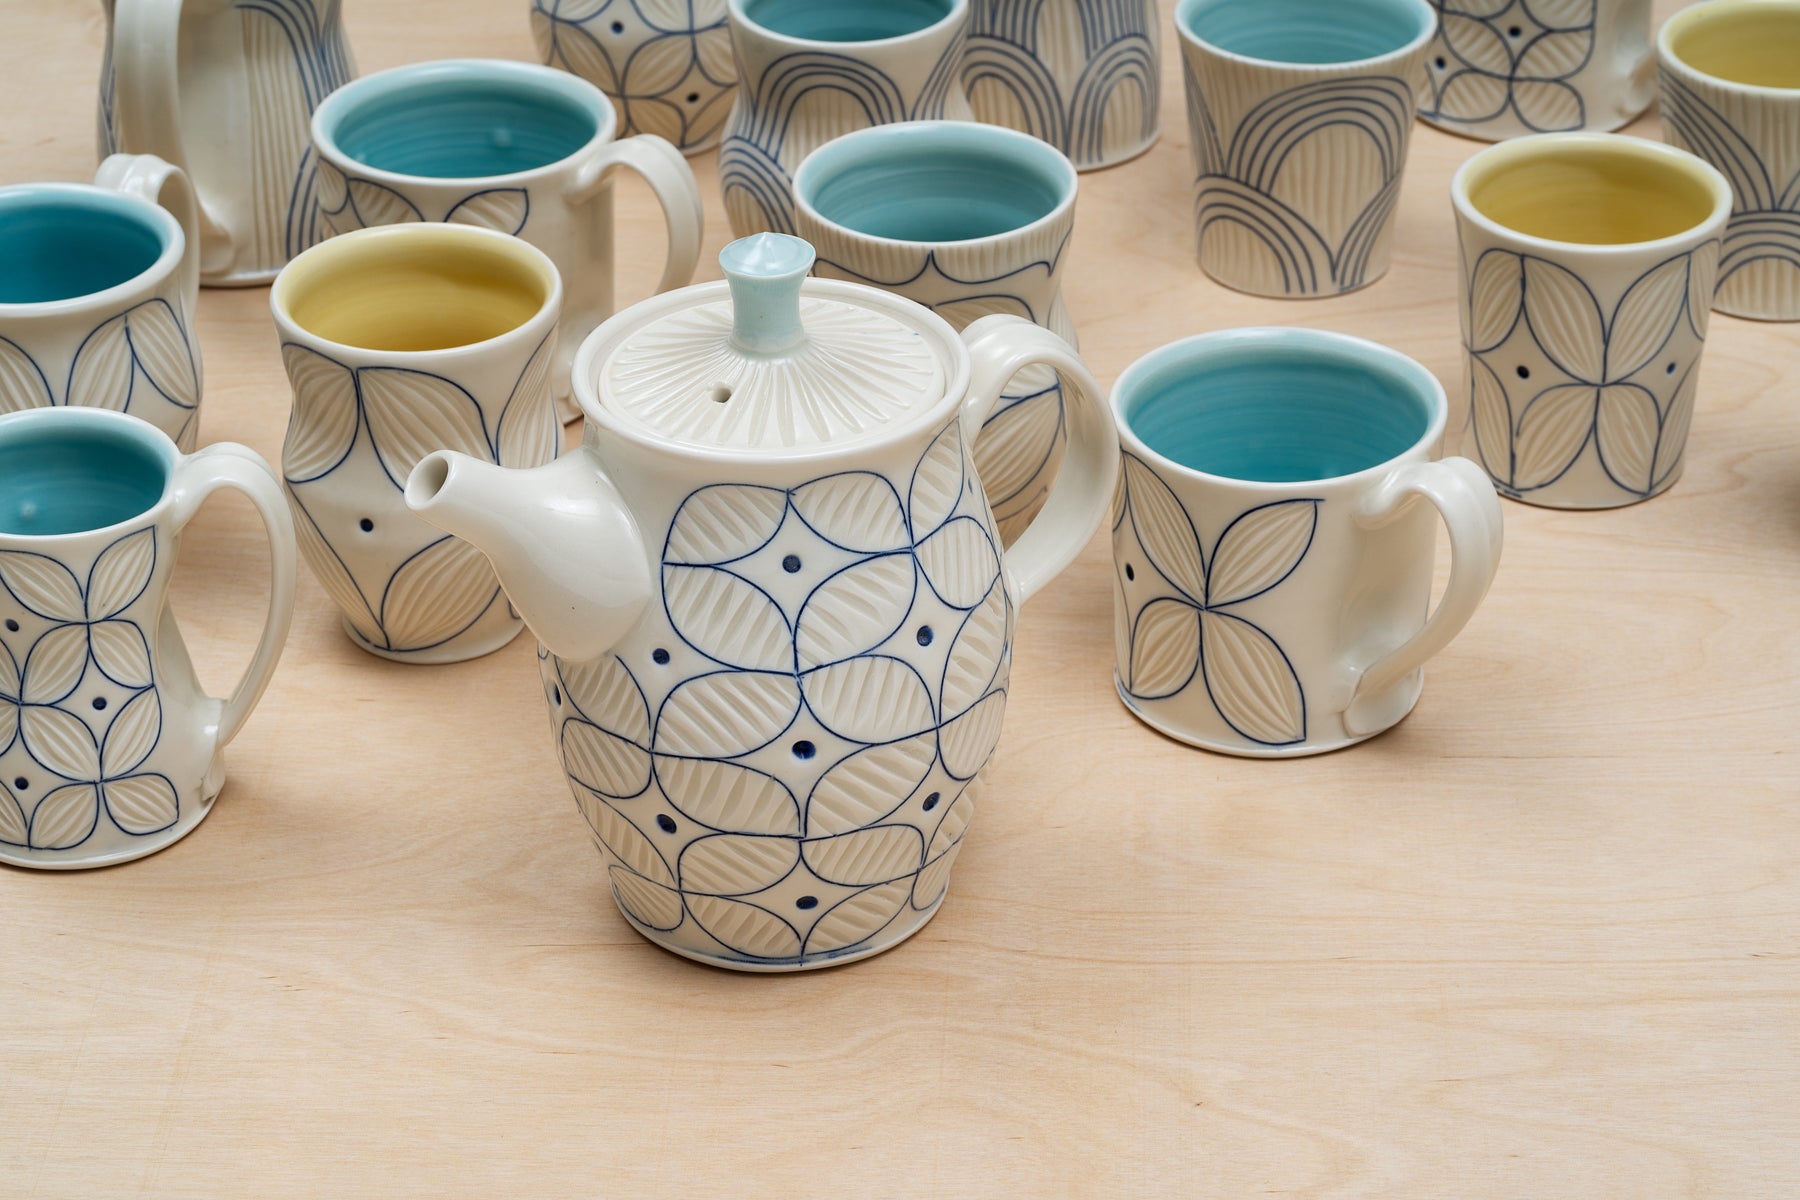 A white porcelain teapot with blue geometric designs made by ceramic artist Julie Wiggins surrounded by matching cups with blue and yellow glazed interiors. Image by Loam